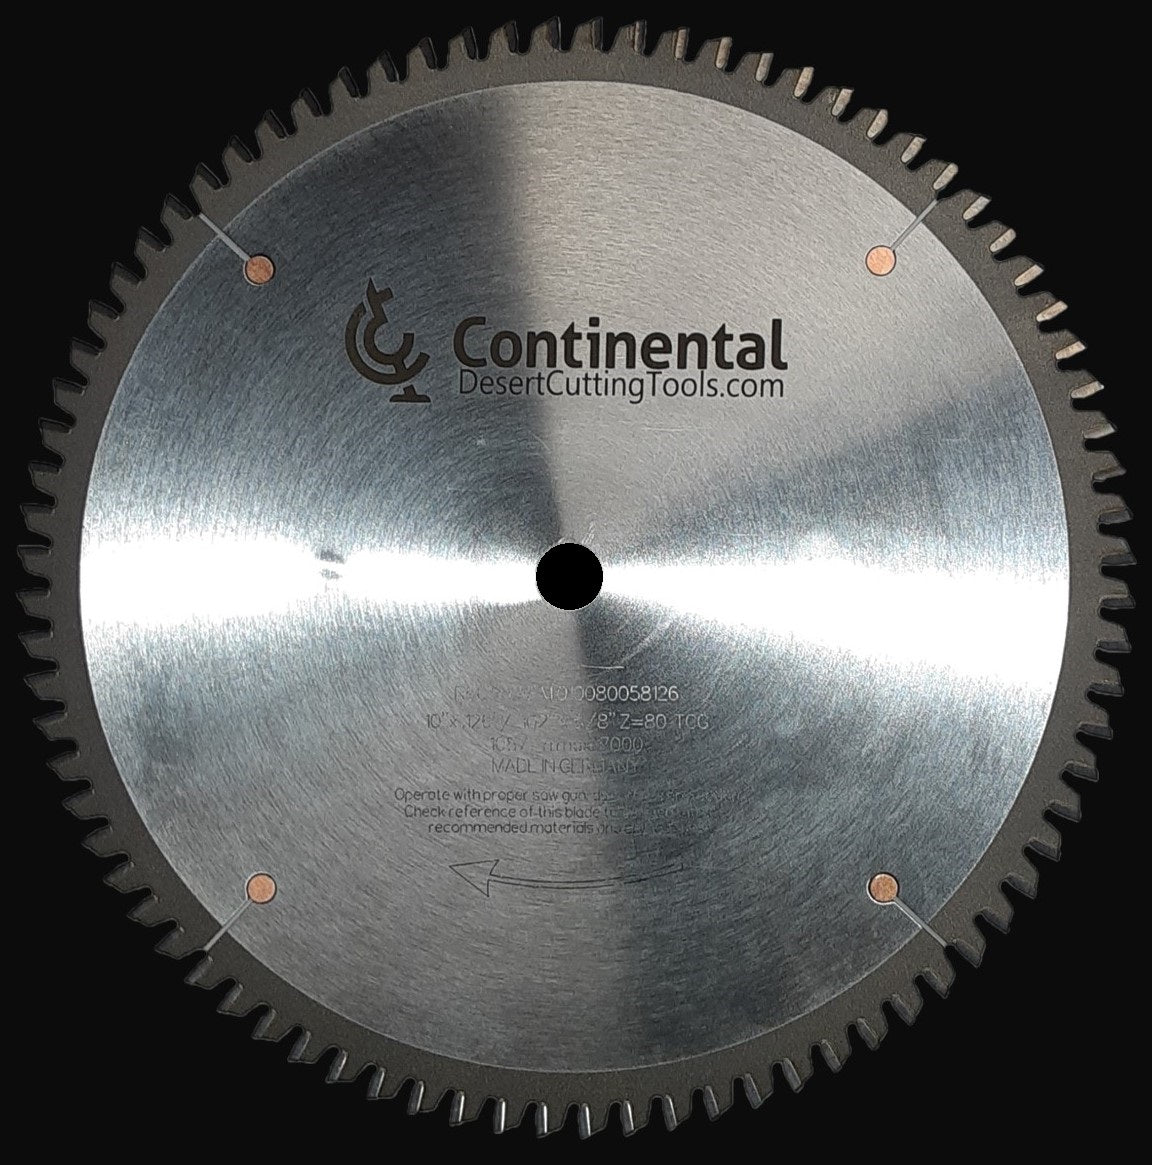 C-1080P Continental Saw Blade 10"x80 tooth 5/8" bore Triple Chip with Dub Raker